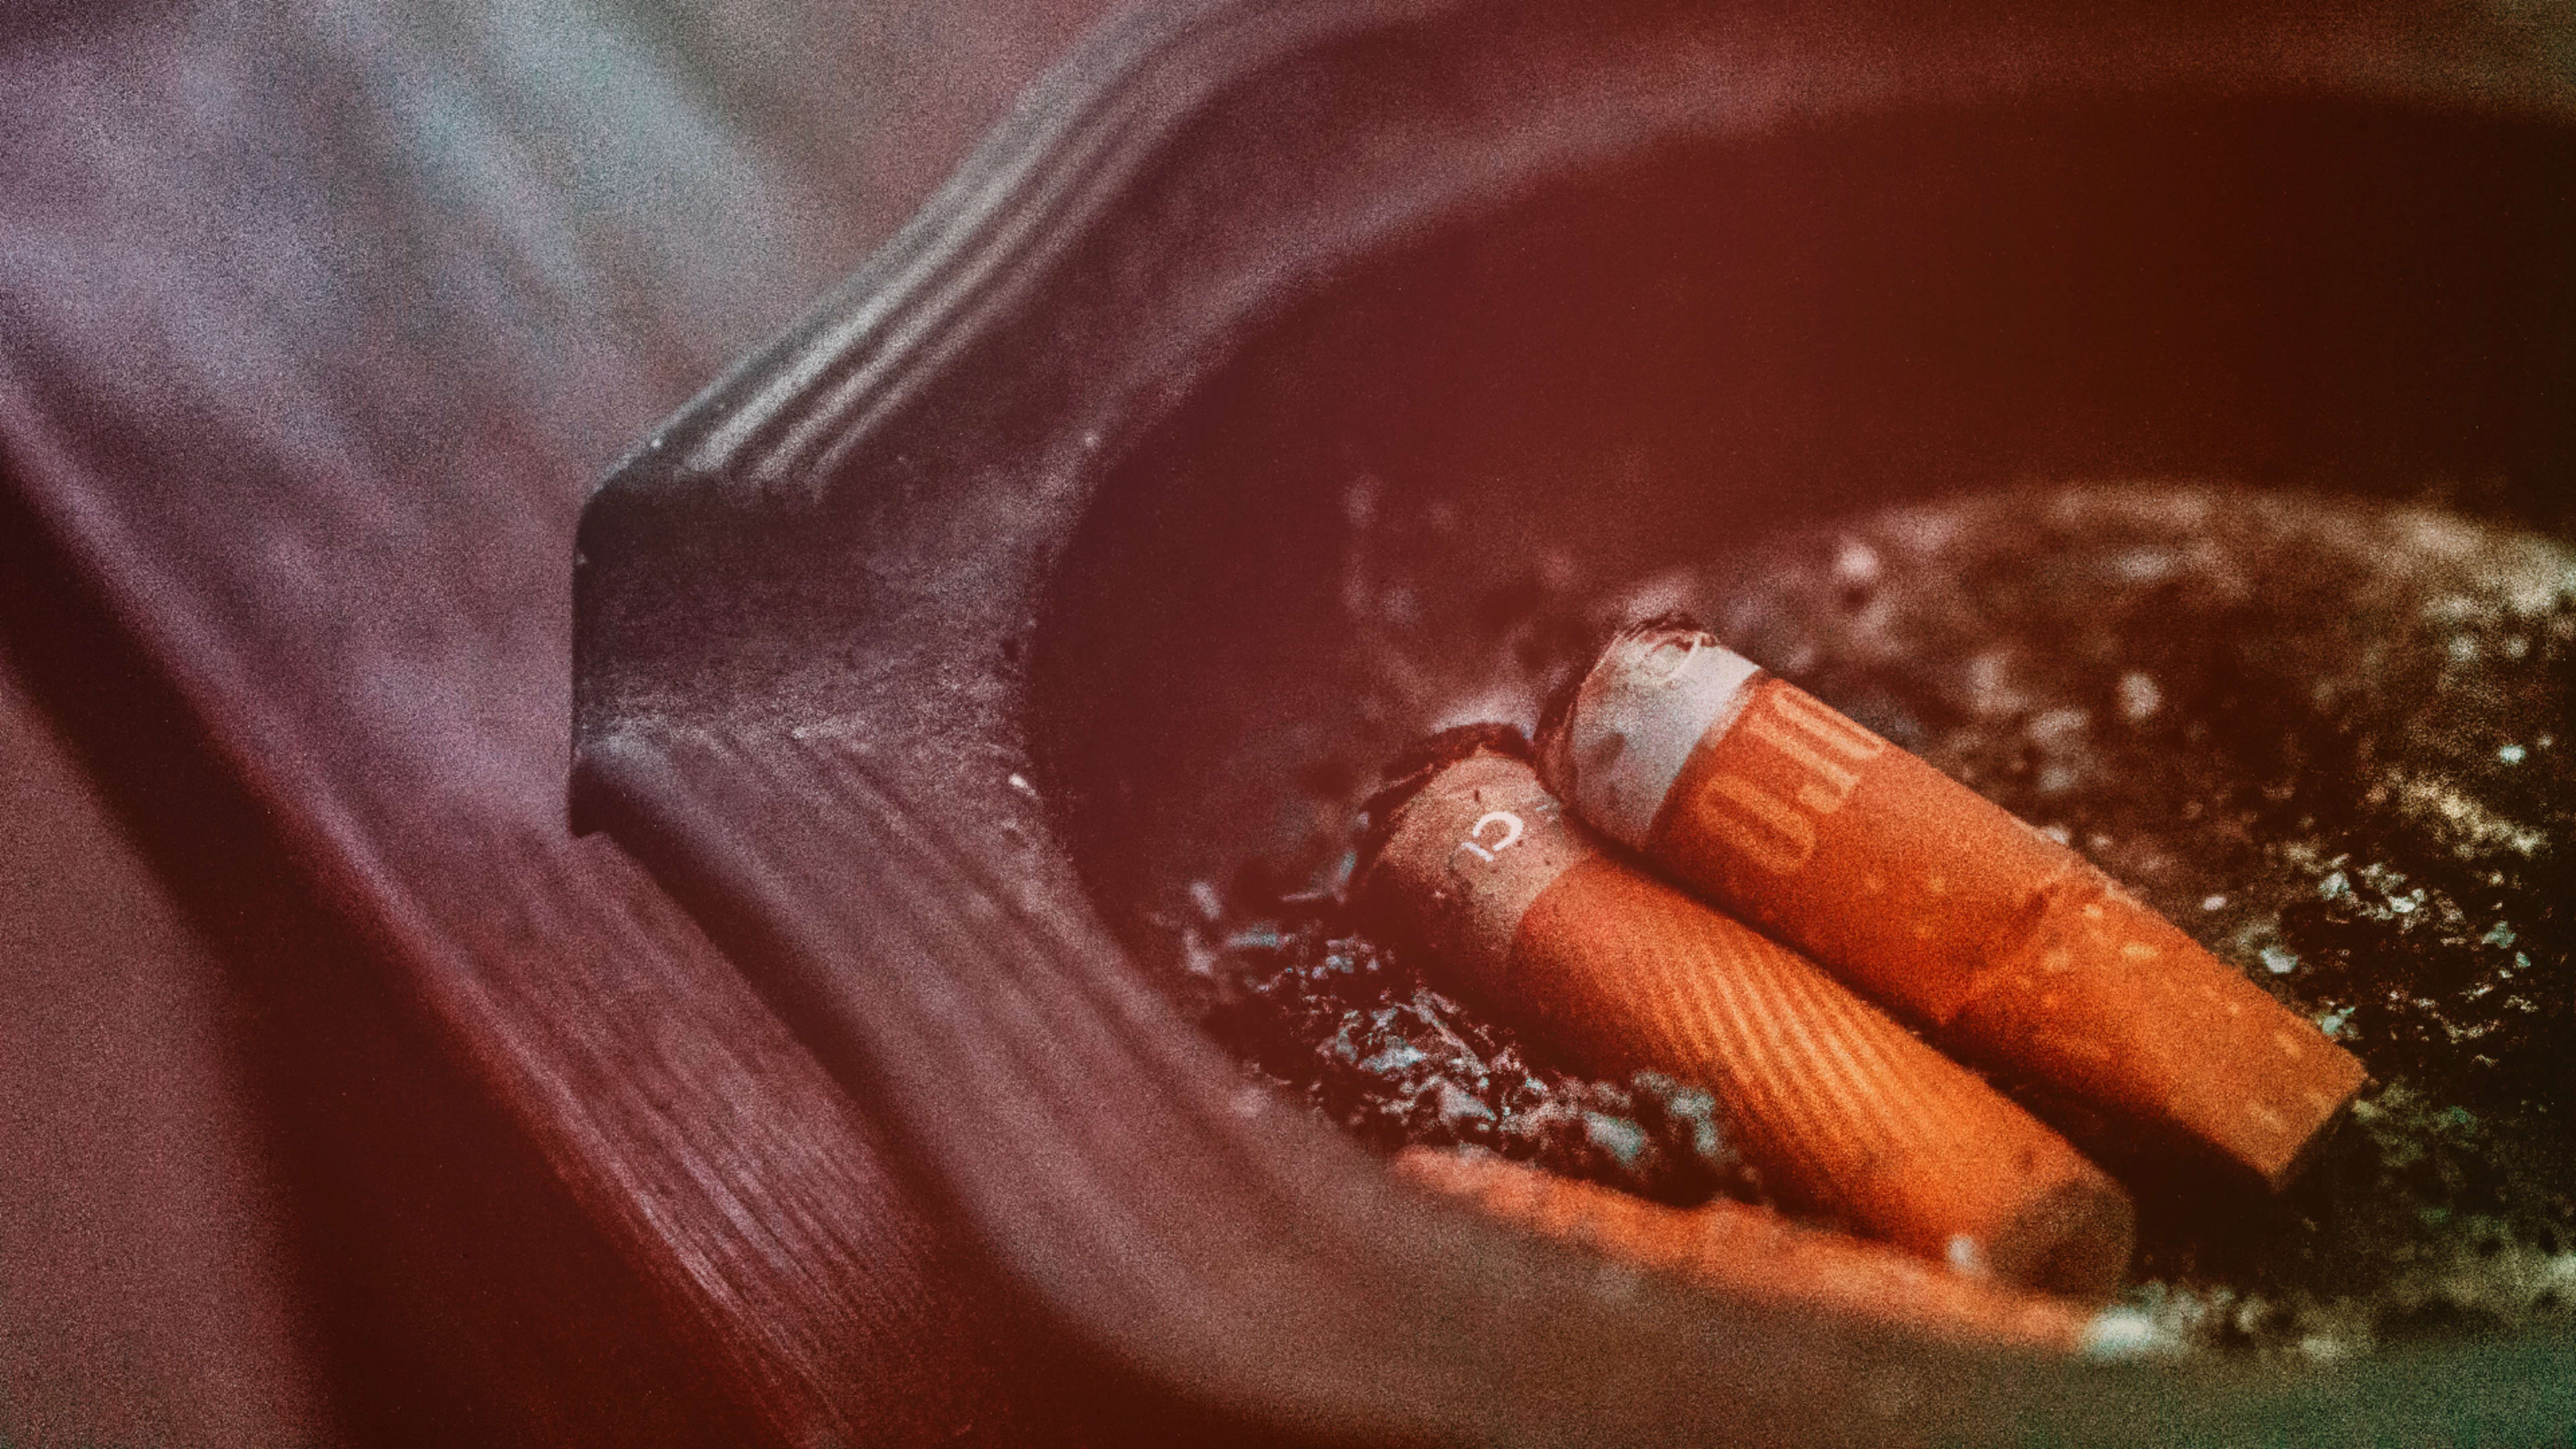 Tobacco companies beware: Smoking is at an all-time low in the U.S.